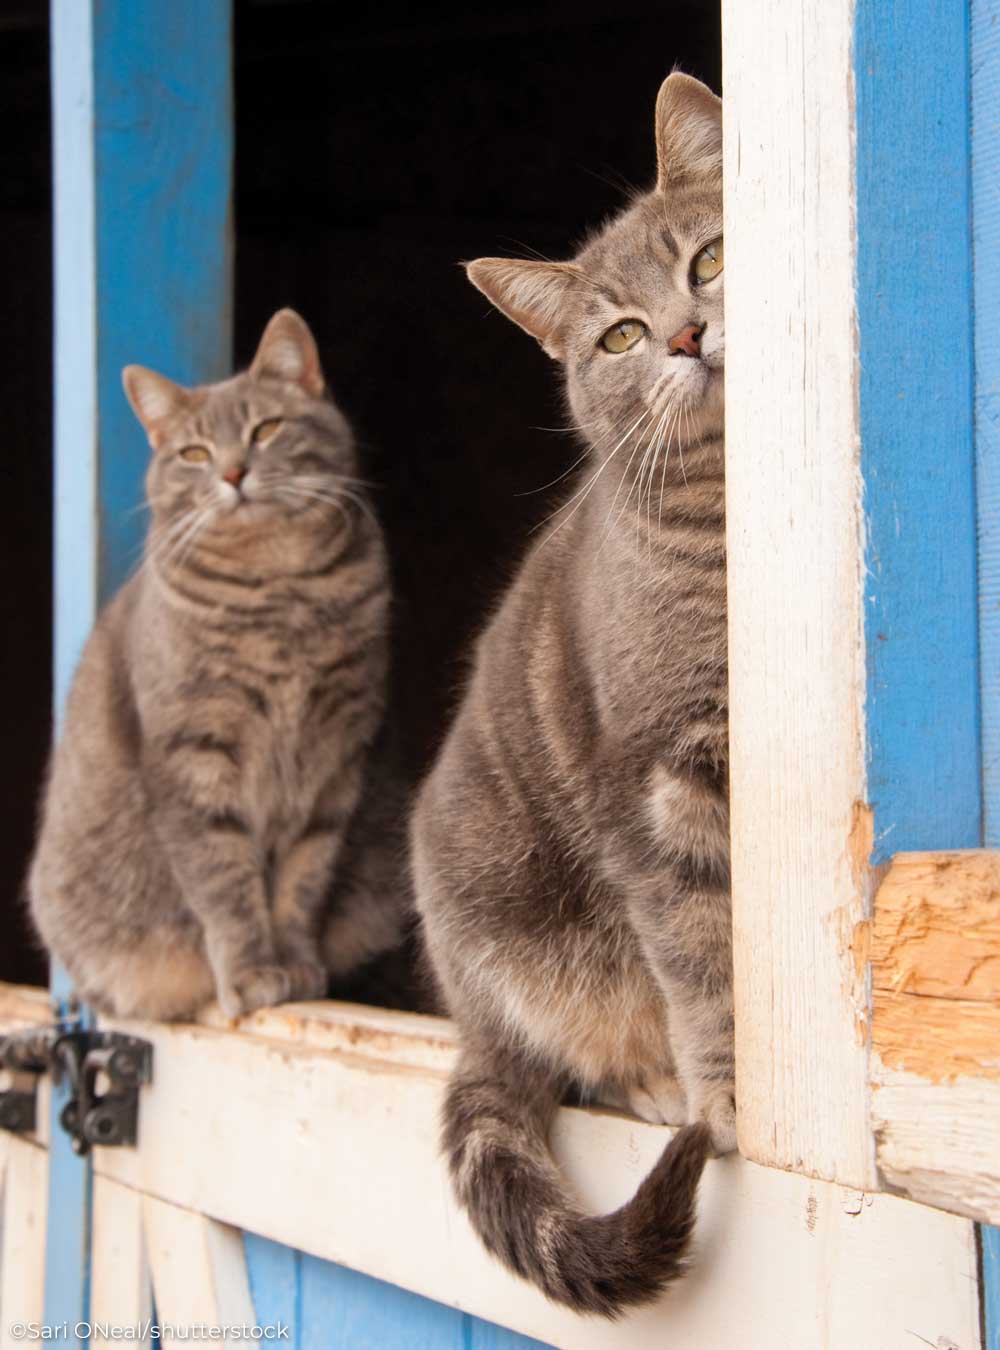 Two barn cats in a stall window